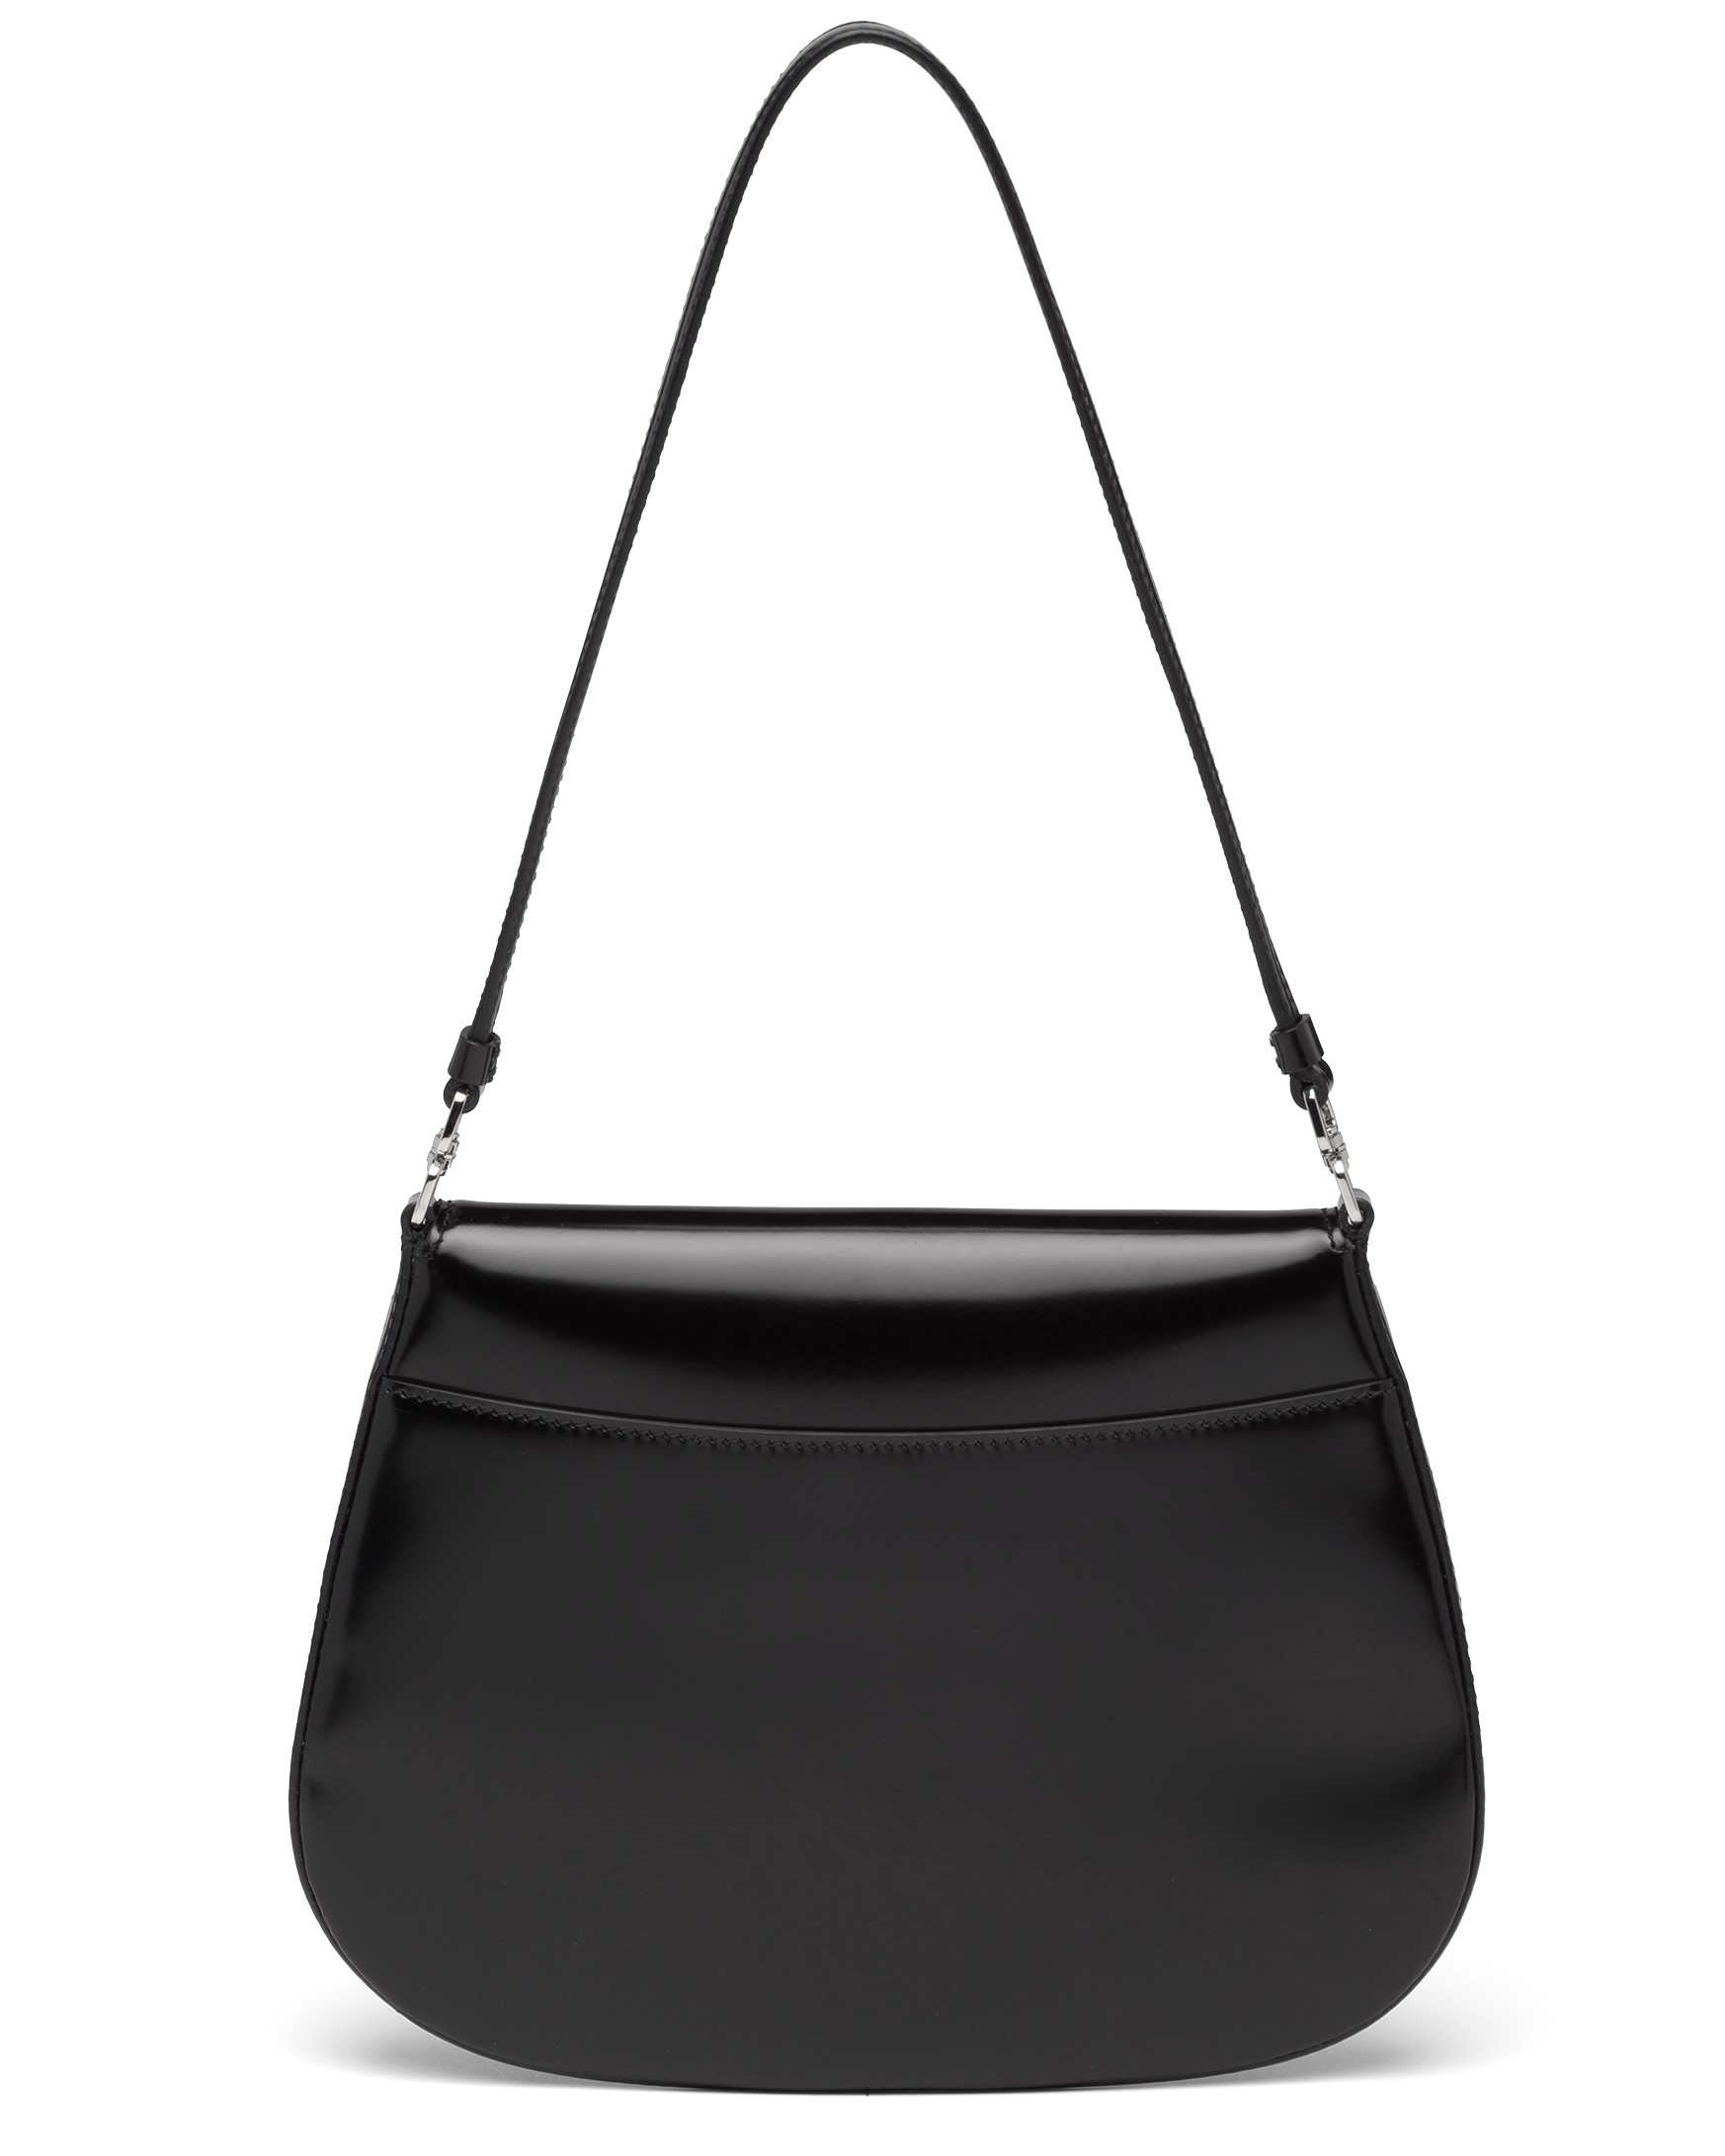 TÚI XÁCH PRADA CLEO BRUSHED LEATHER SHOULDER BAG WITH FLAP 10